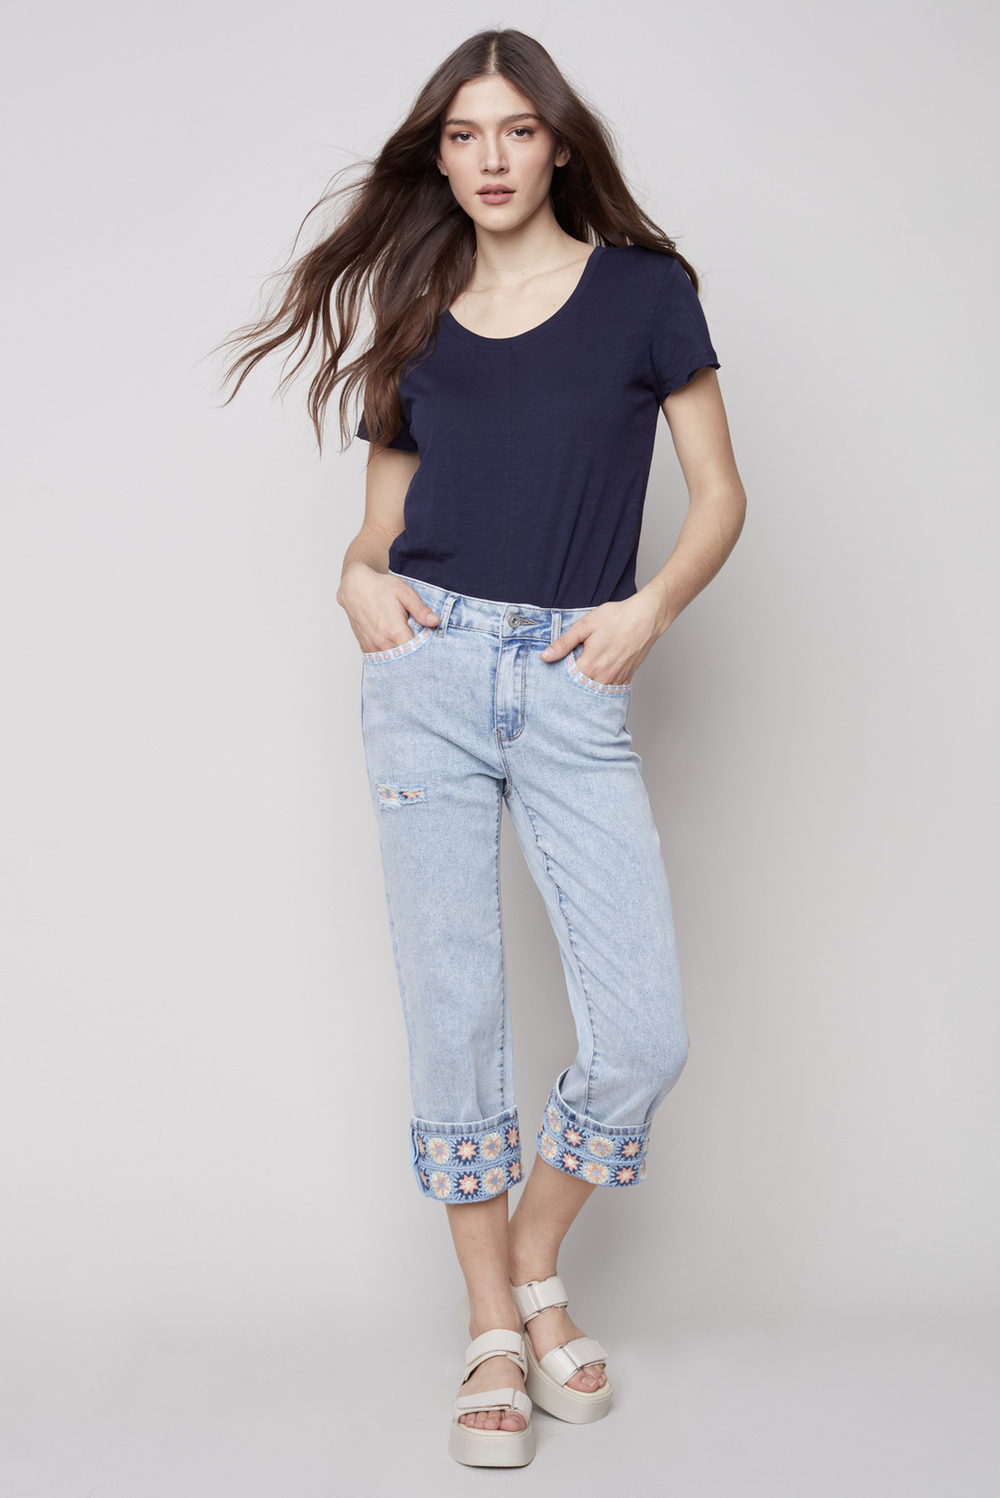 Embroidered Detail Jeans Style C5418. Lt. Blue